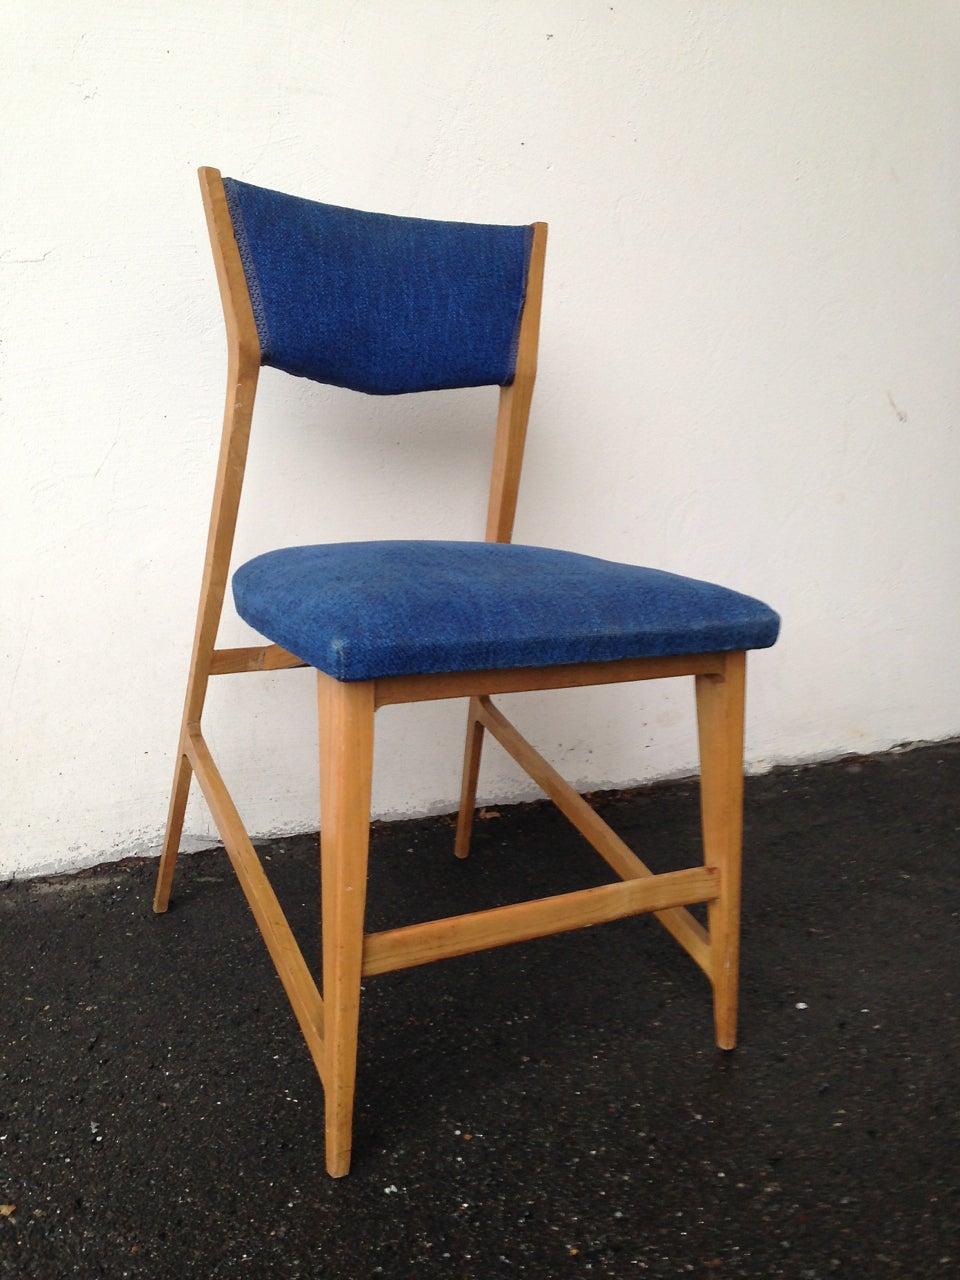 Small Curved Desk with Matching Chair Attributed to Gio Ponti 1